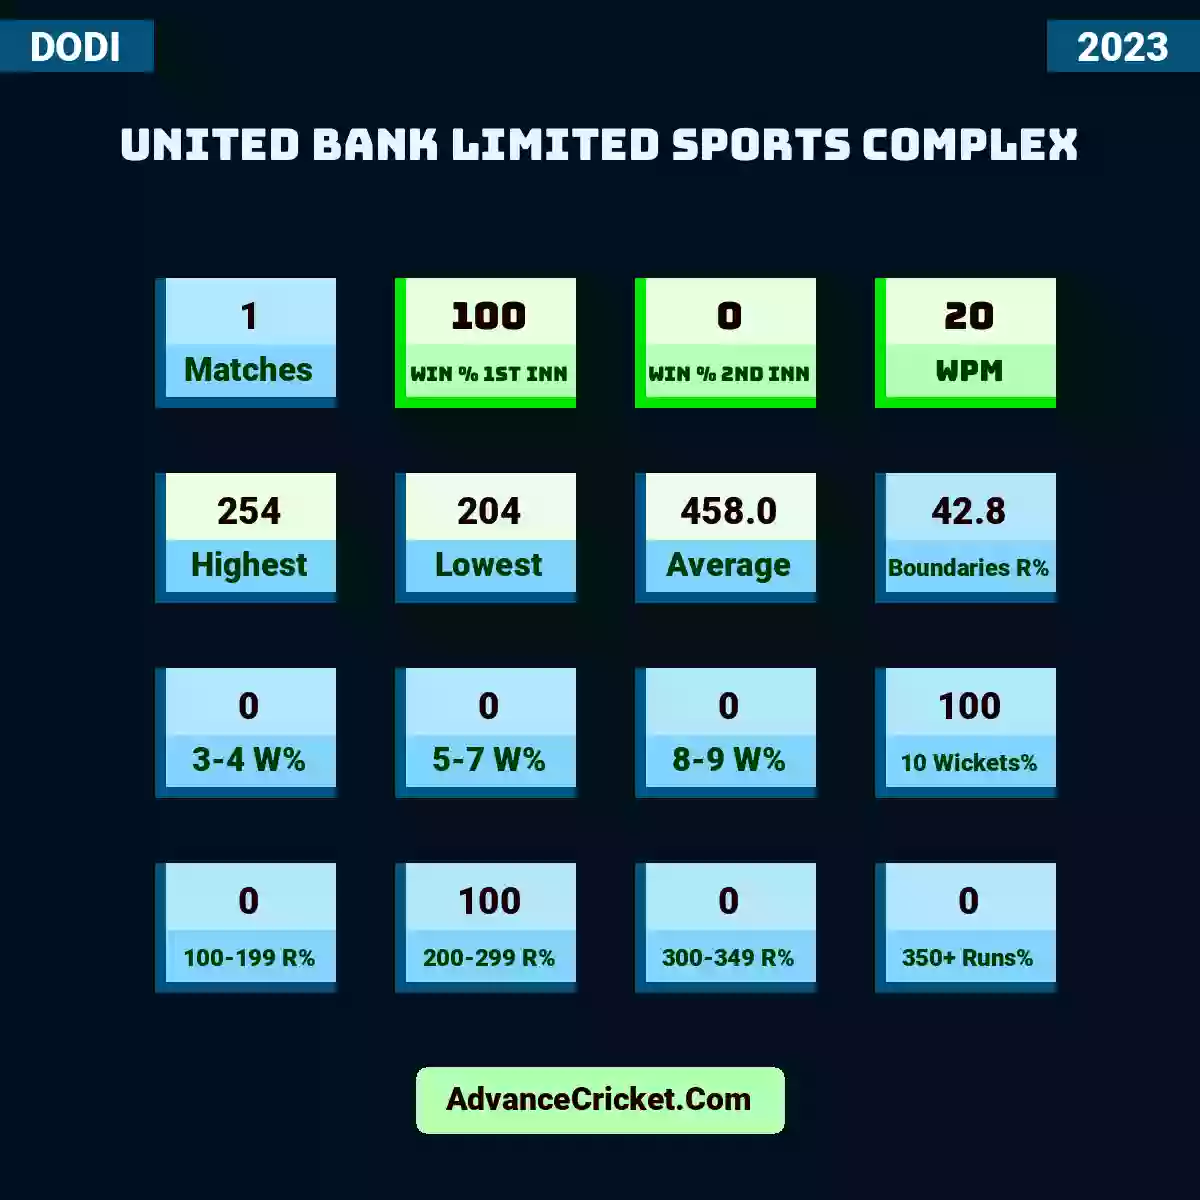 Image showing United Bank Limited Sports Complex with Matches: 1, Win % 1st Inn: 100, Win % 2nd Inn: 0, WPM: 20, Highest: 254, Lowest: 204, Average: 458.0, Boundaries R%: 42.8, 3-4 W%: 0, 5-7 W%: 0, 8-9 W%: 0, 10 Wickets%: 100, 100-199 R%: 0, 200-299 R%: 100, 300-349 R%: 0, 350+ Runs%: 0.